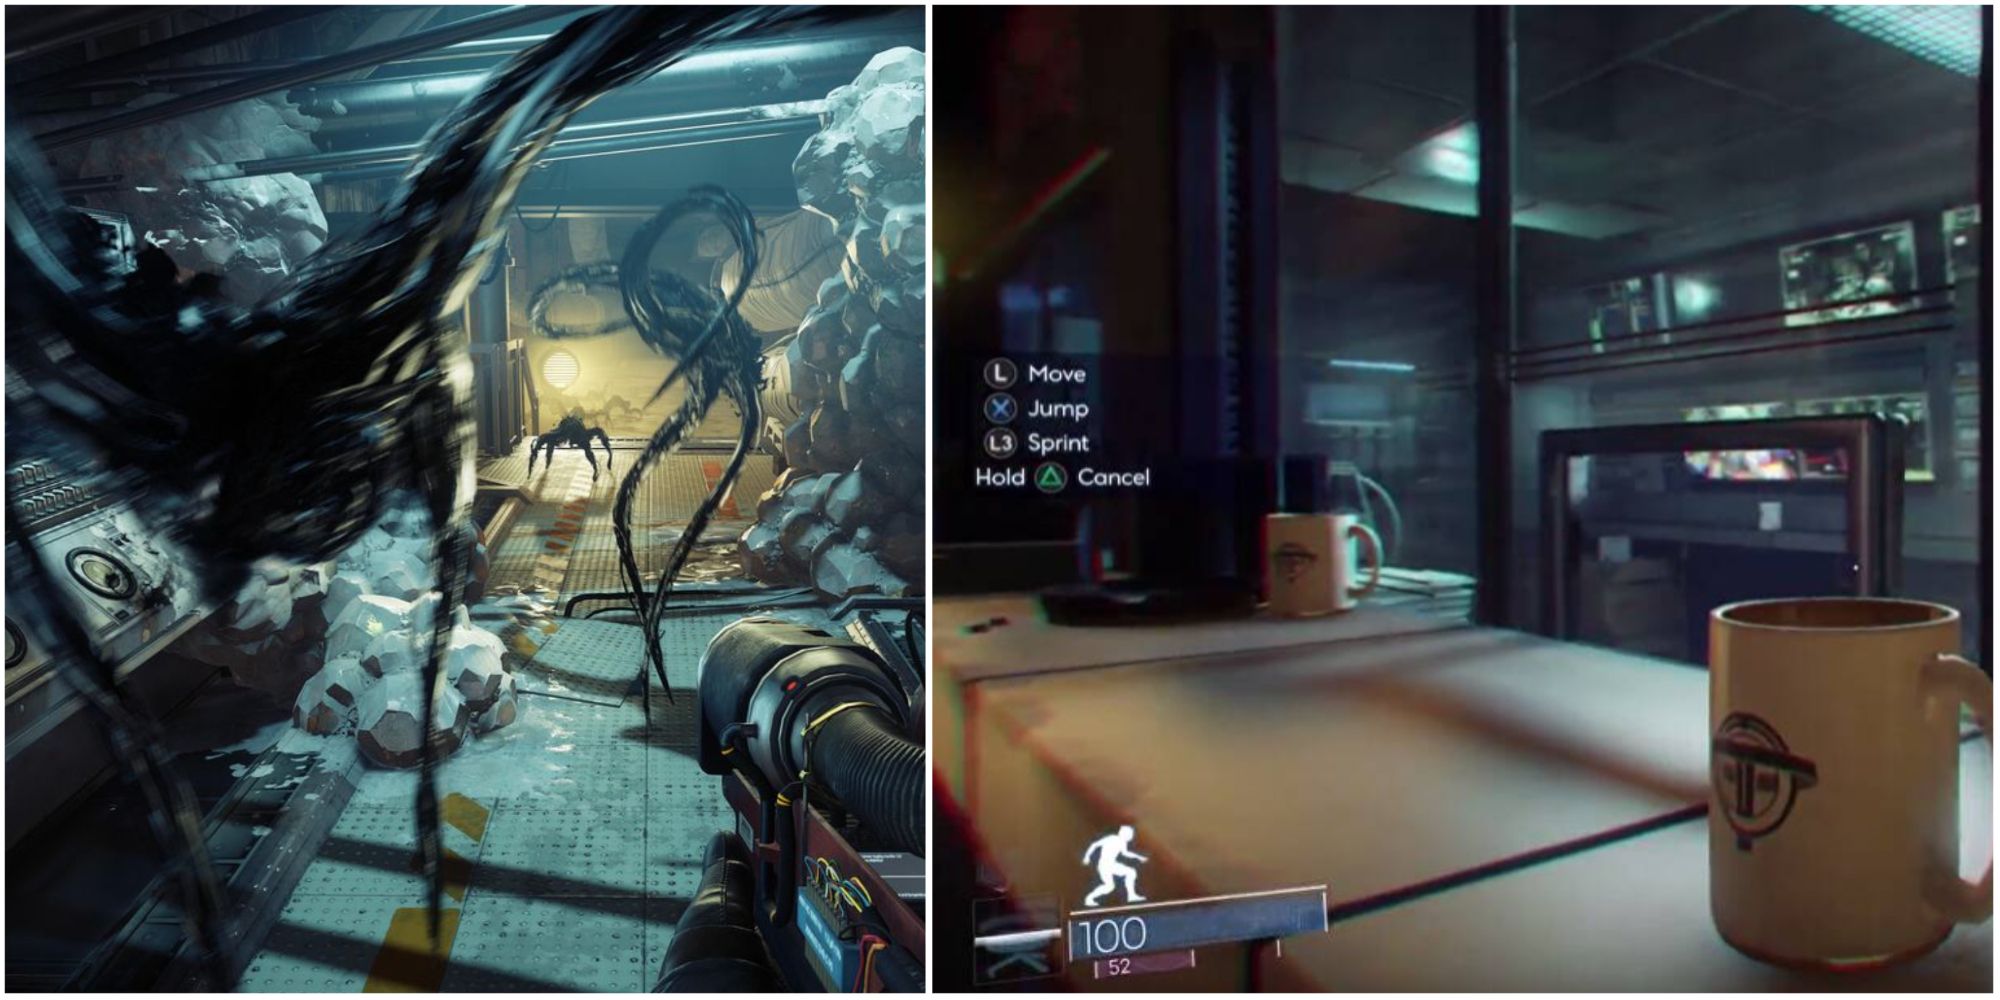 Collage of fightinh Mimic aliens and a playable/controllable coffee mug after using Mimic Matter in Prey